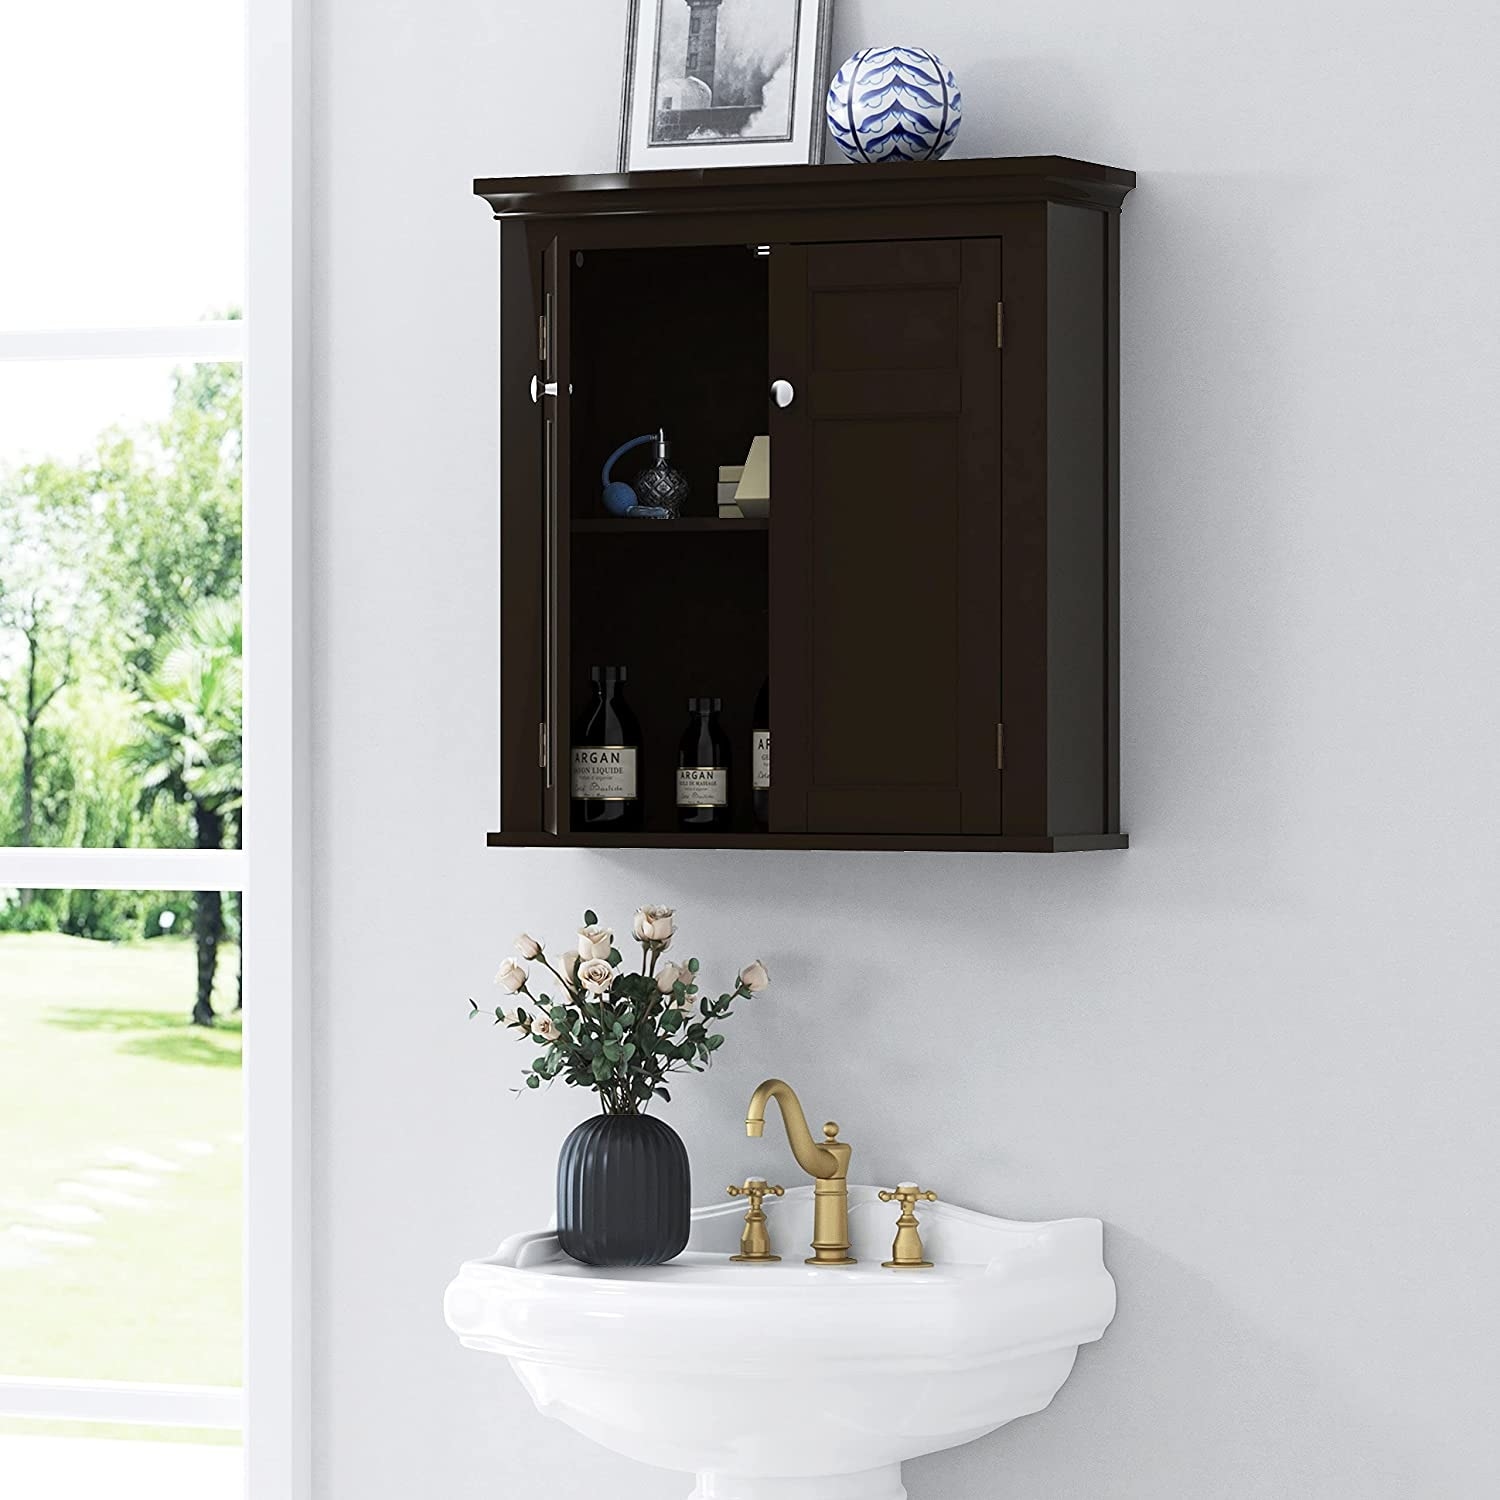 https://ak1.ostkcdn.com/images/products/is/images/direct/13a61747ff7bc02c98d8d6524c02b1b479fd48e2/Spirich-Home-Bathroom-Cabinet-Wall-Mounted-with-Doors-and-Shelves%2C-2-Doors-Shuttered-Wall-Cabinet%2C-Bathroom-Wall-Cabinet%2C-White.jpg